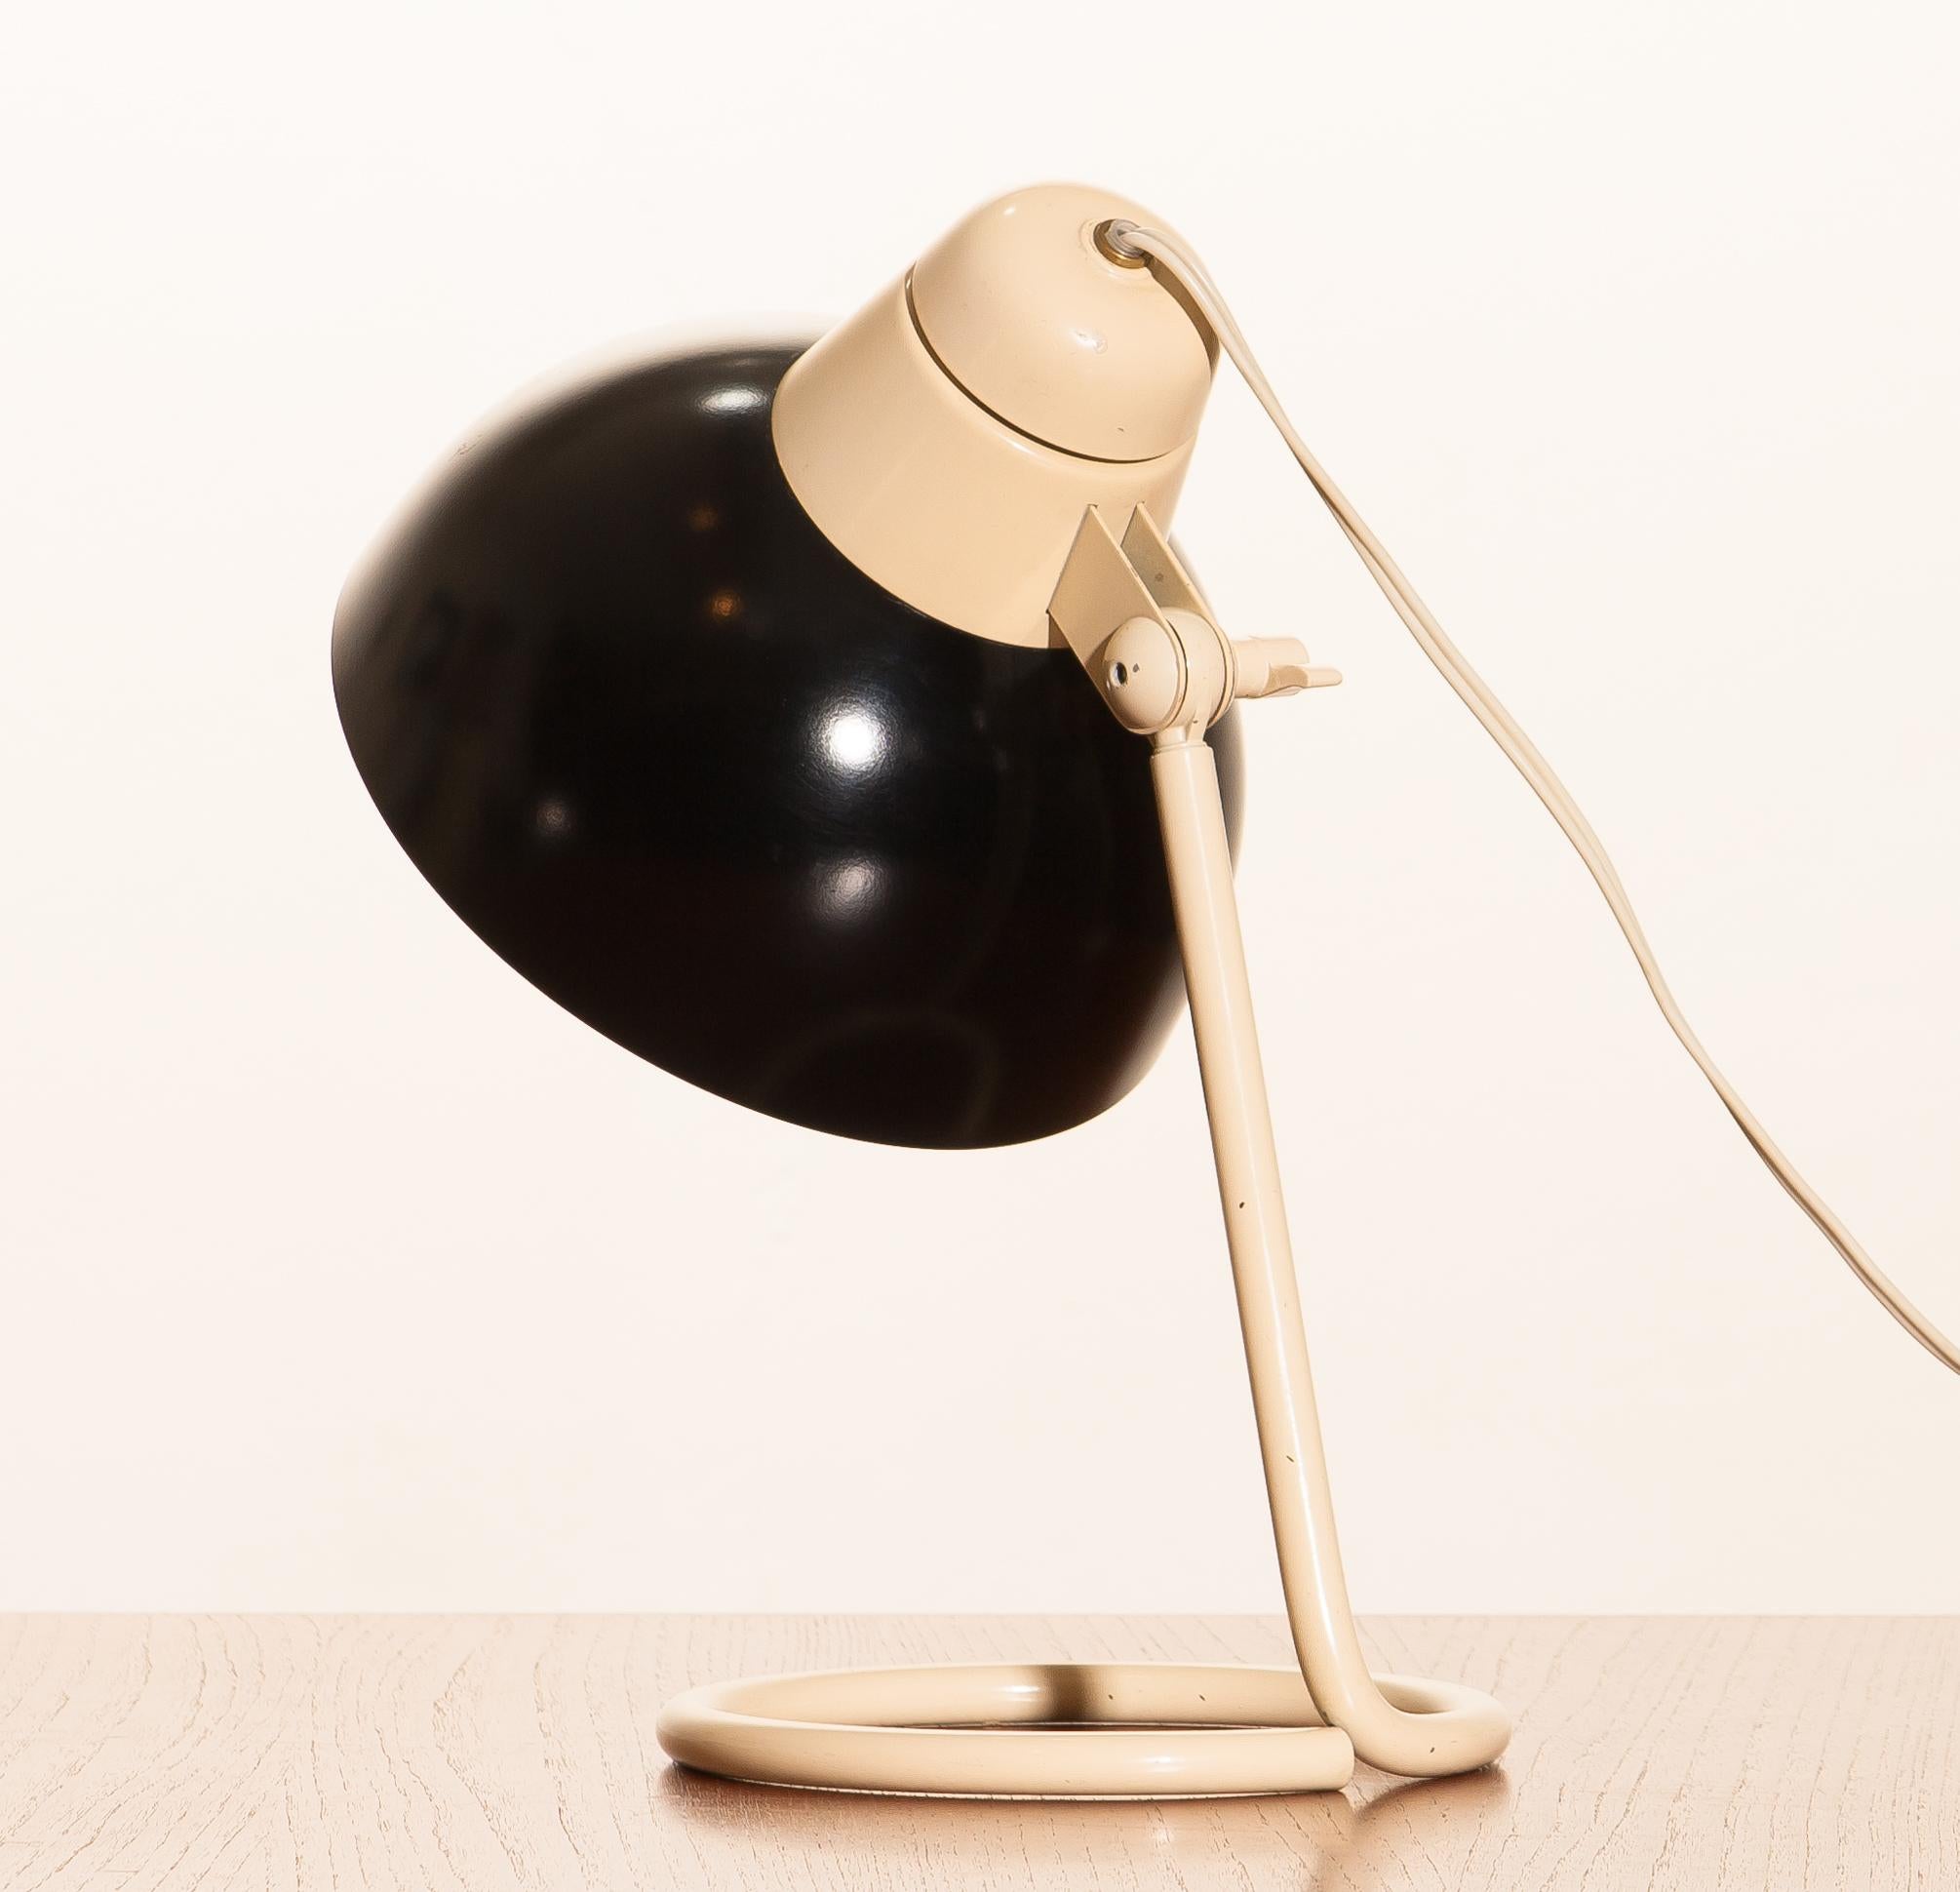 Mid-20th Century 1950s, Philips Metal Desk or Table Lamp in Off-White and Black